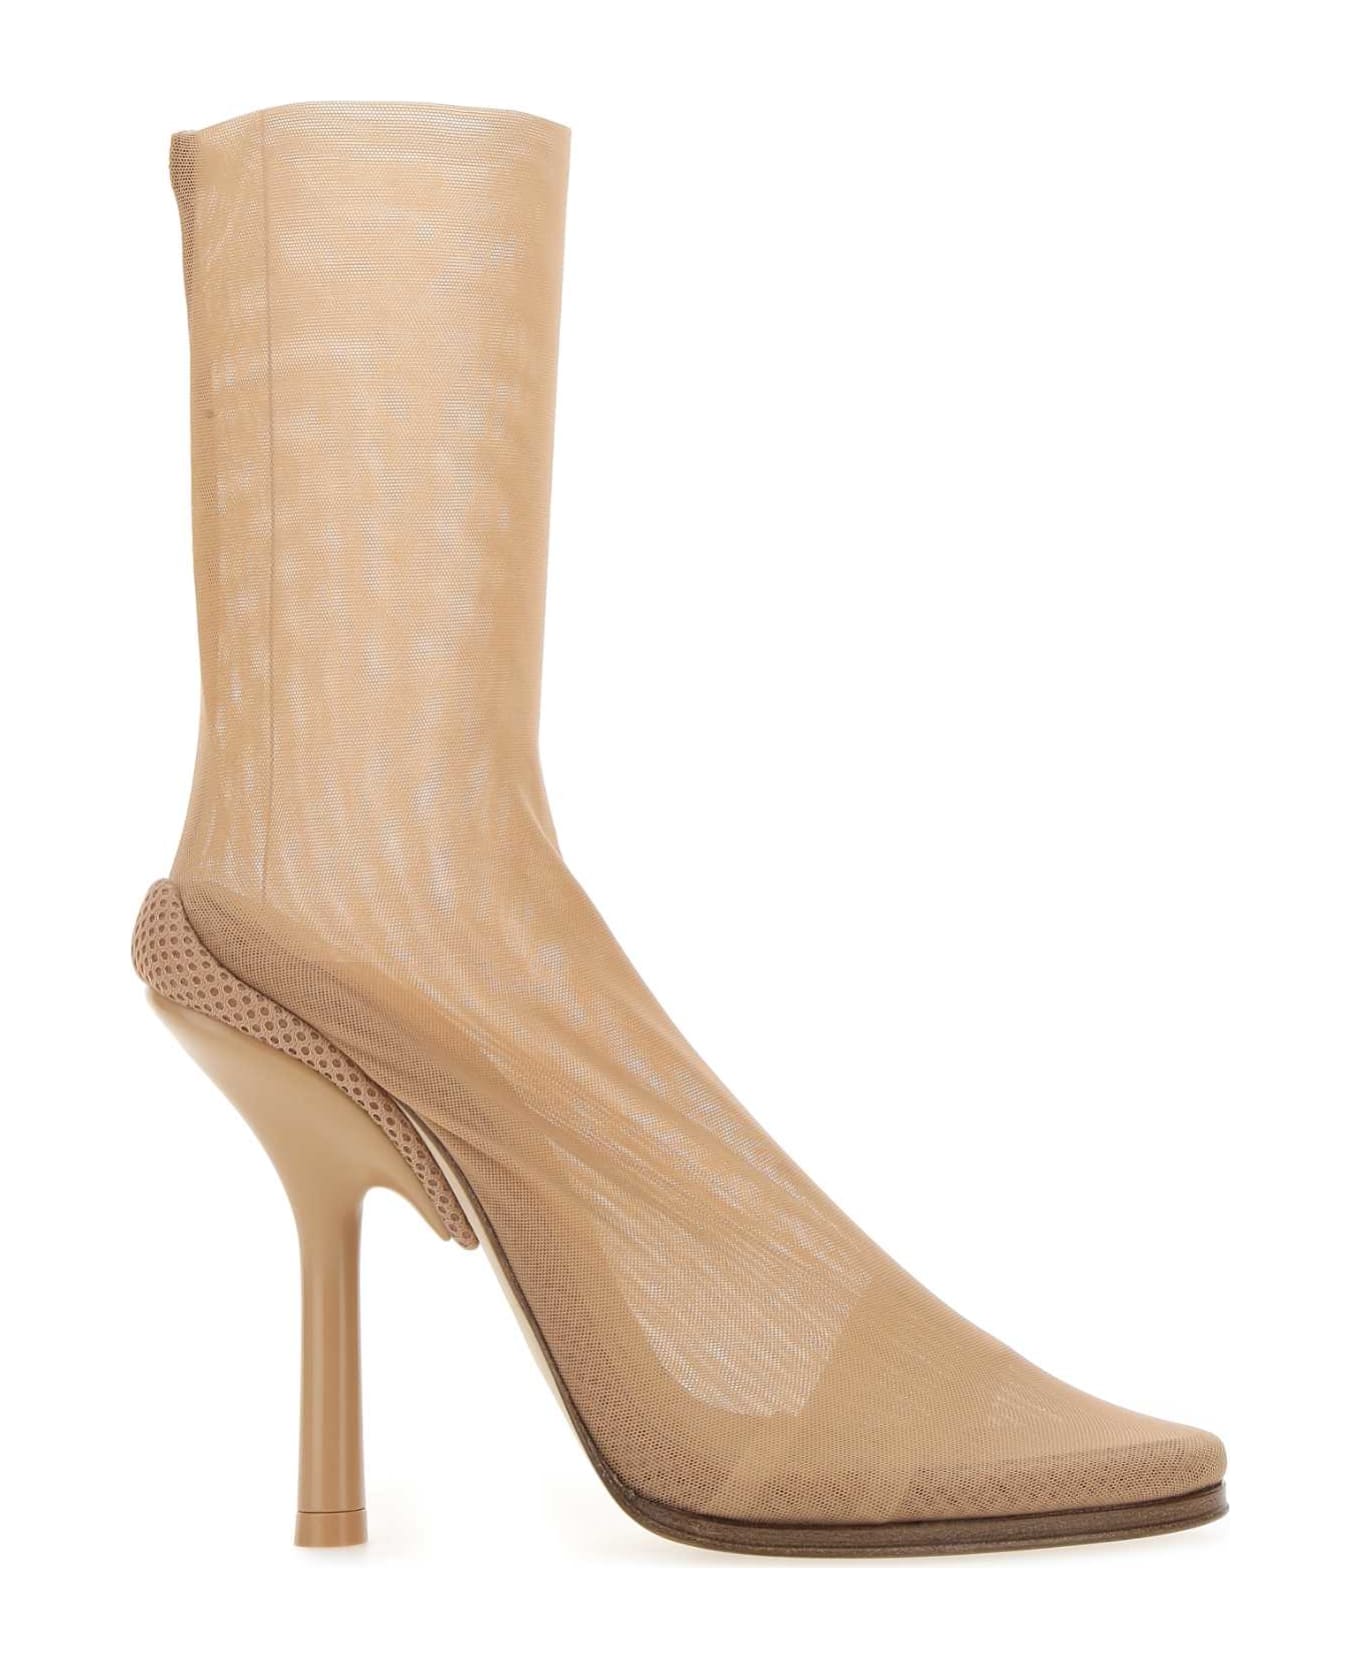 Burberry Beige Stretch Tulle Ankle Boots - A1435 ブーツ